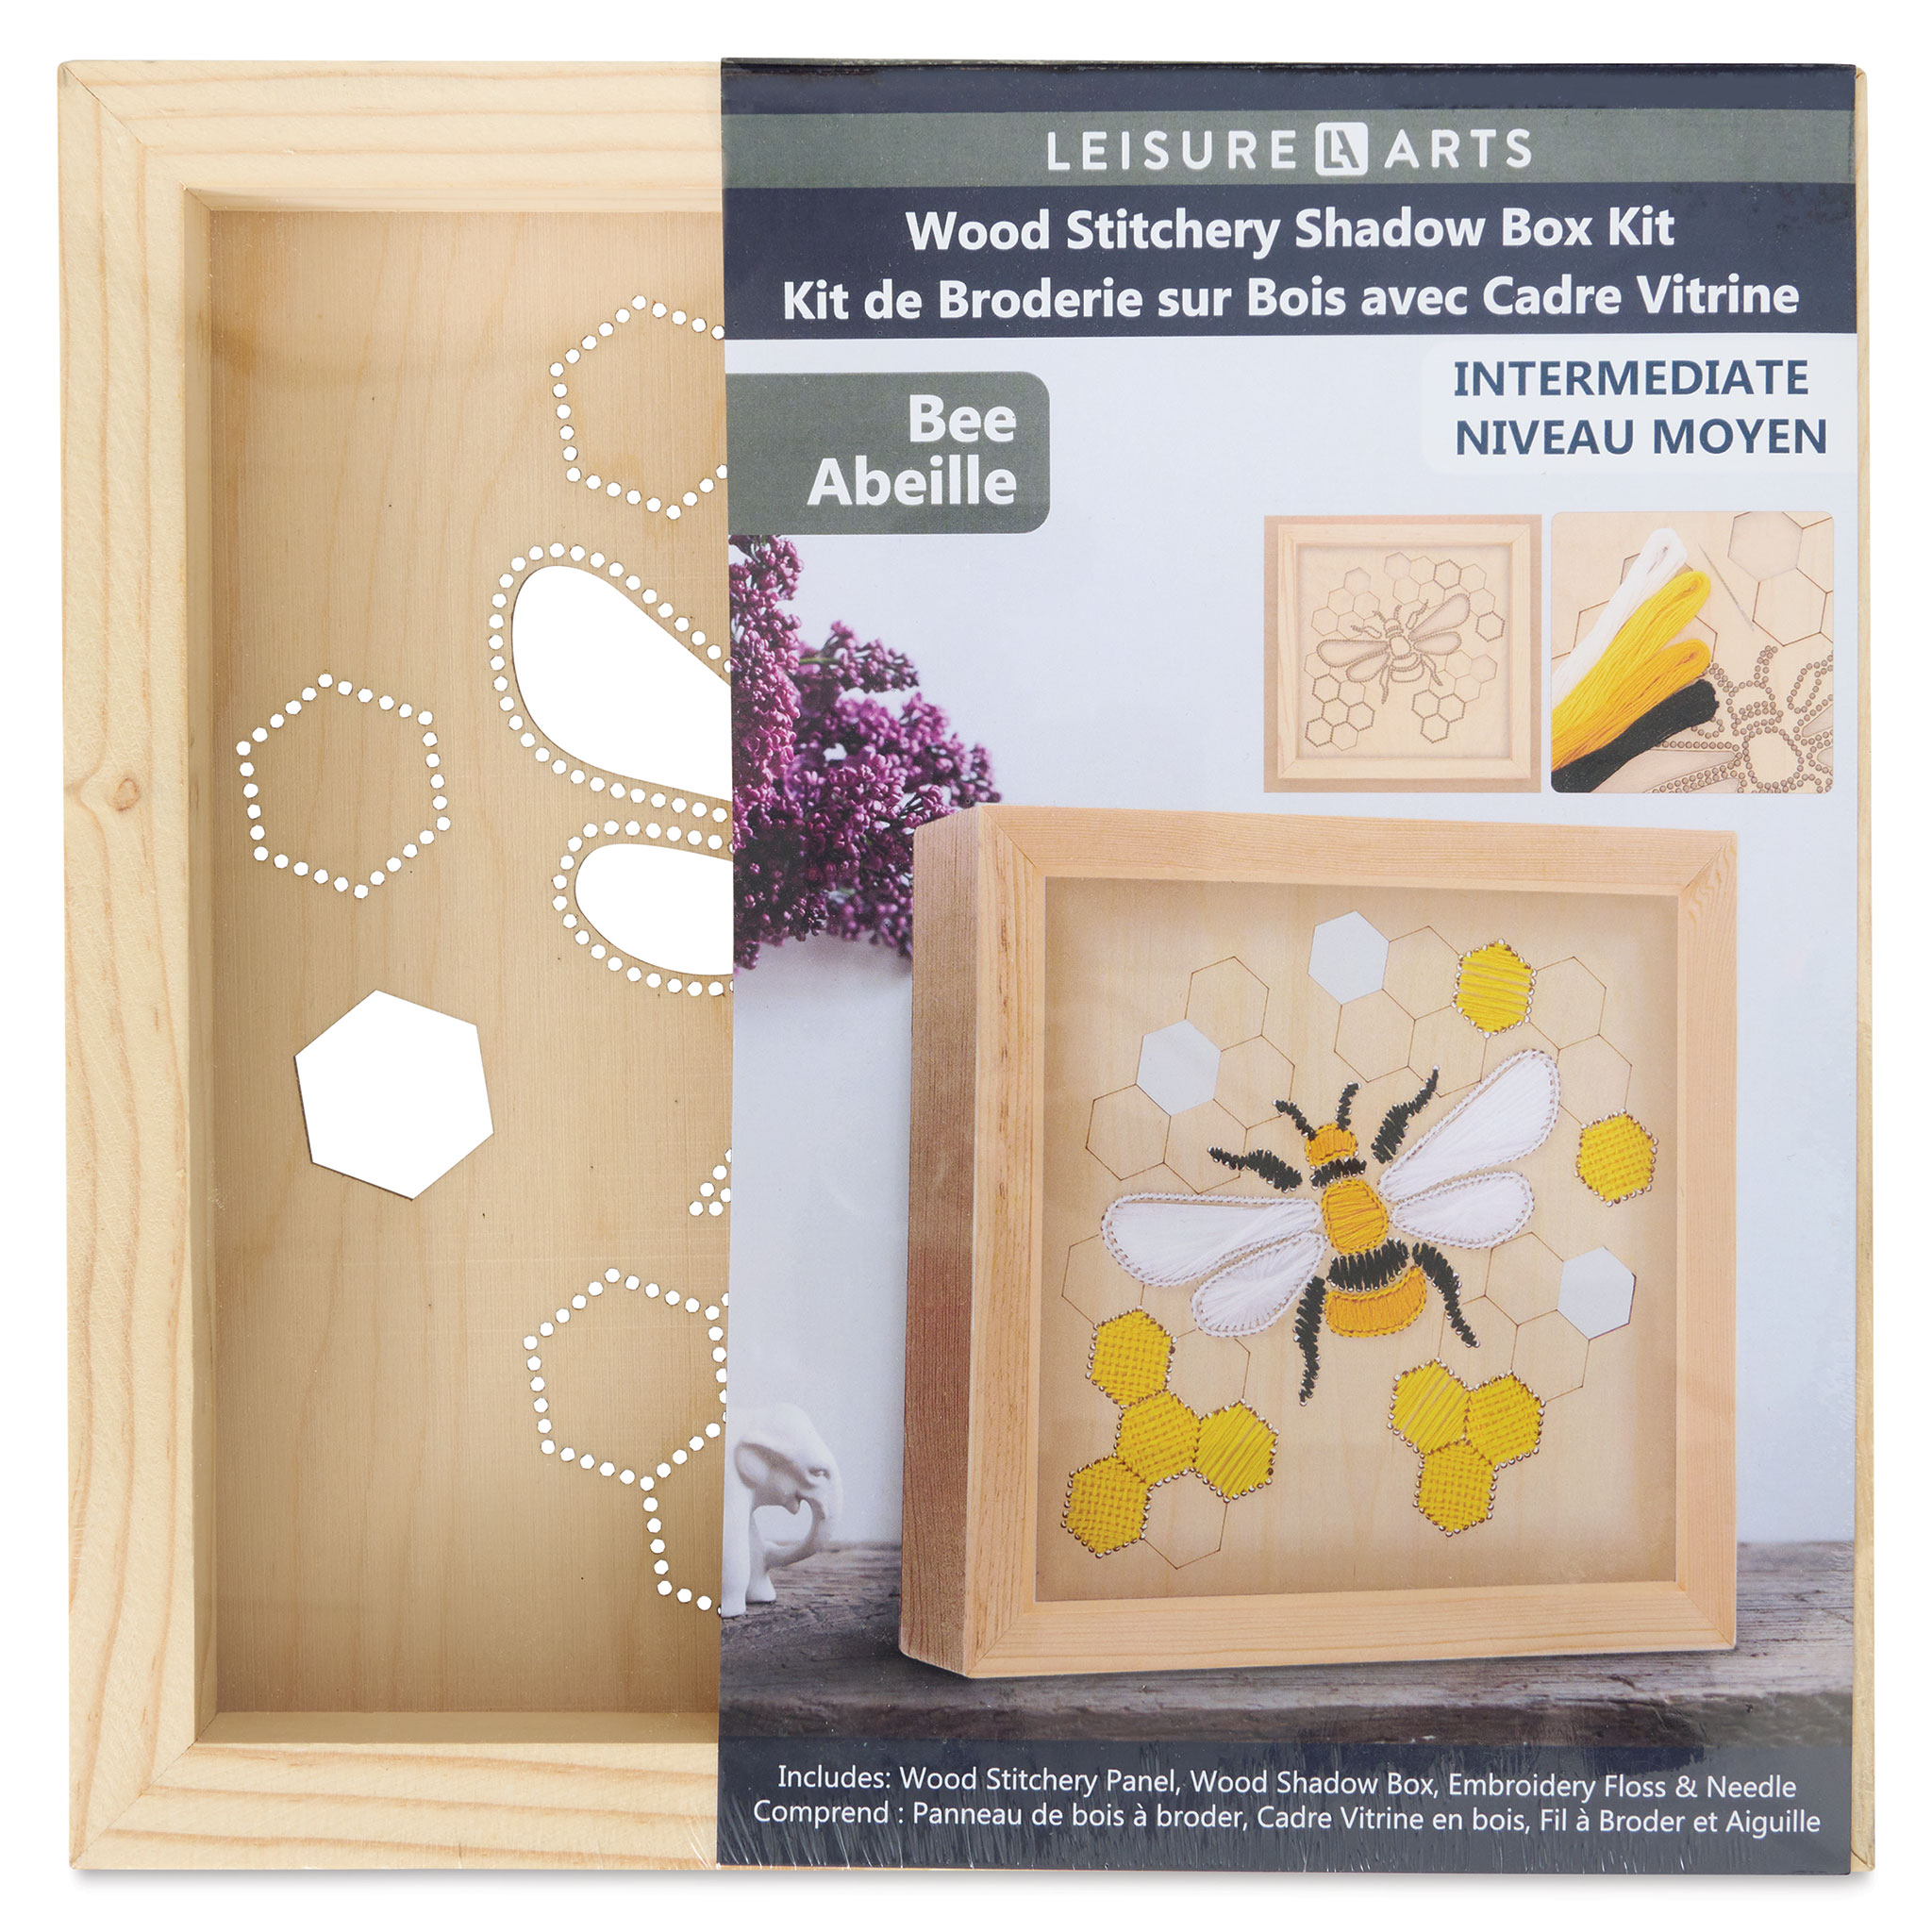 Wood Stitched String Art Kit with Shadow Box Hexagon Flower